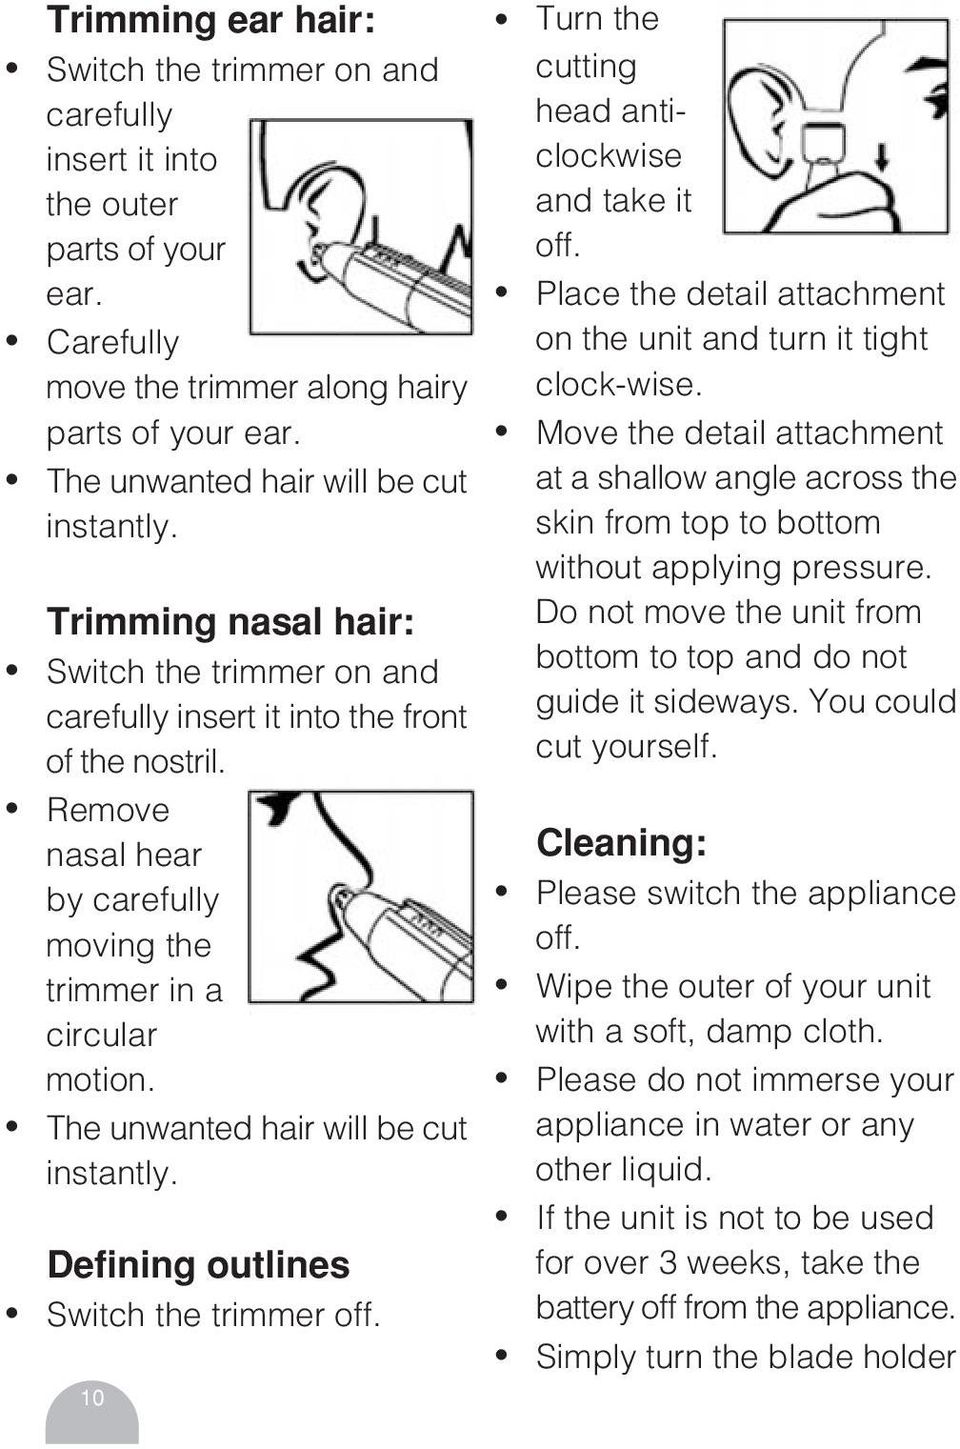 The unwanted hair will be cut instantly. Defining outlines Switch the trimmer off. 10 Turn the cutting head anticlockwise and take it off.